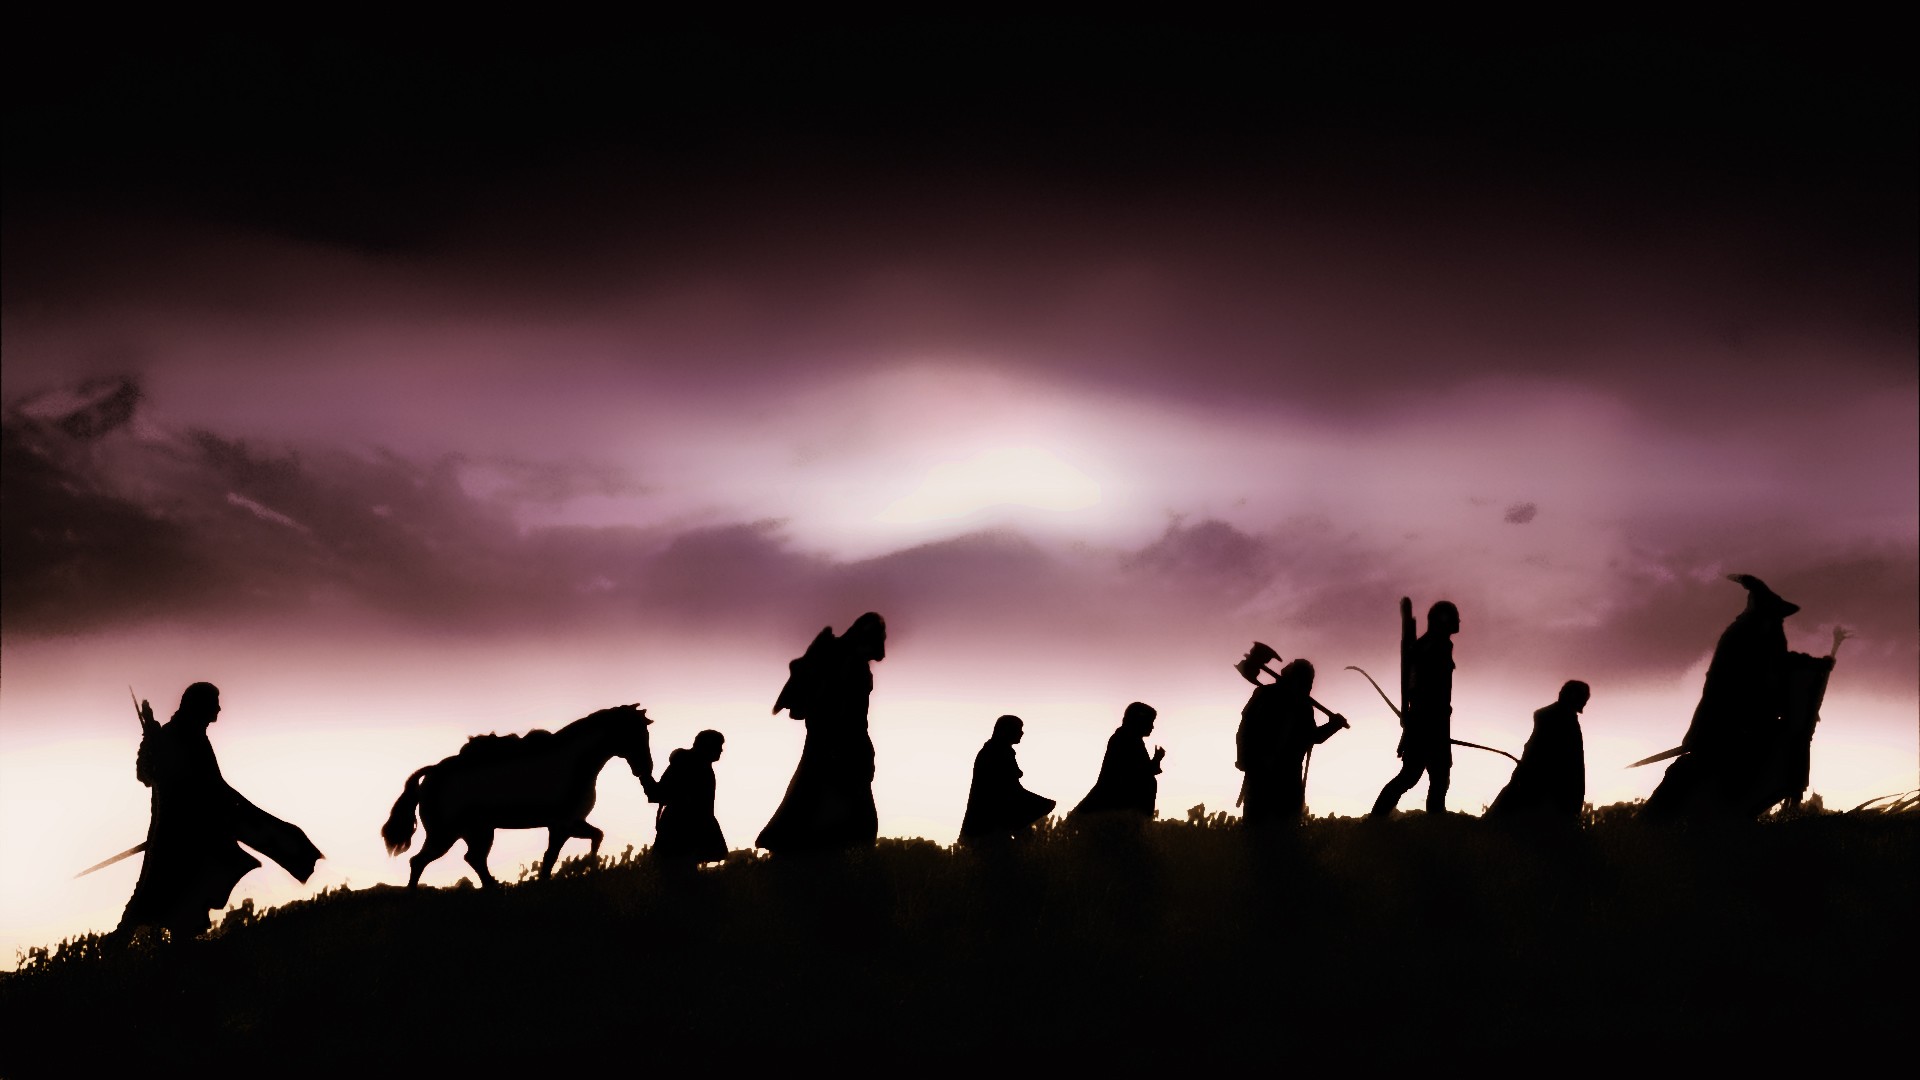 The Lord Of The Rings Silhouette The Lord Of The Rings The Fellowship Of The Ring Movies 1920x1080